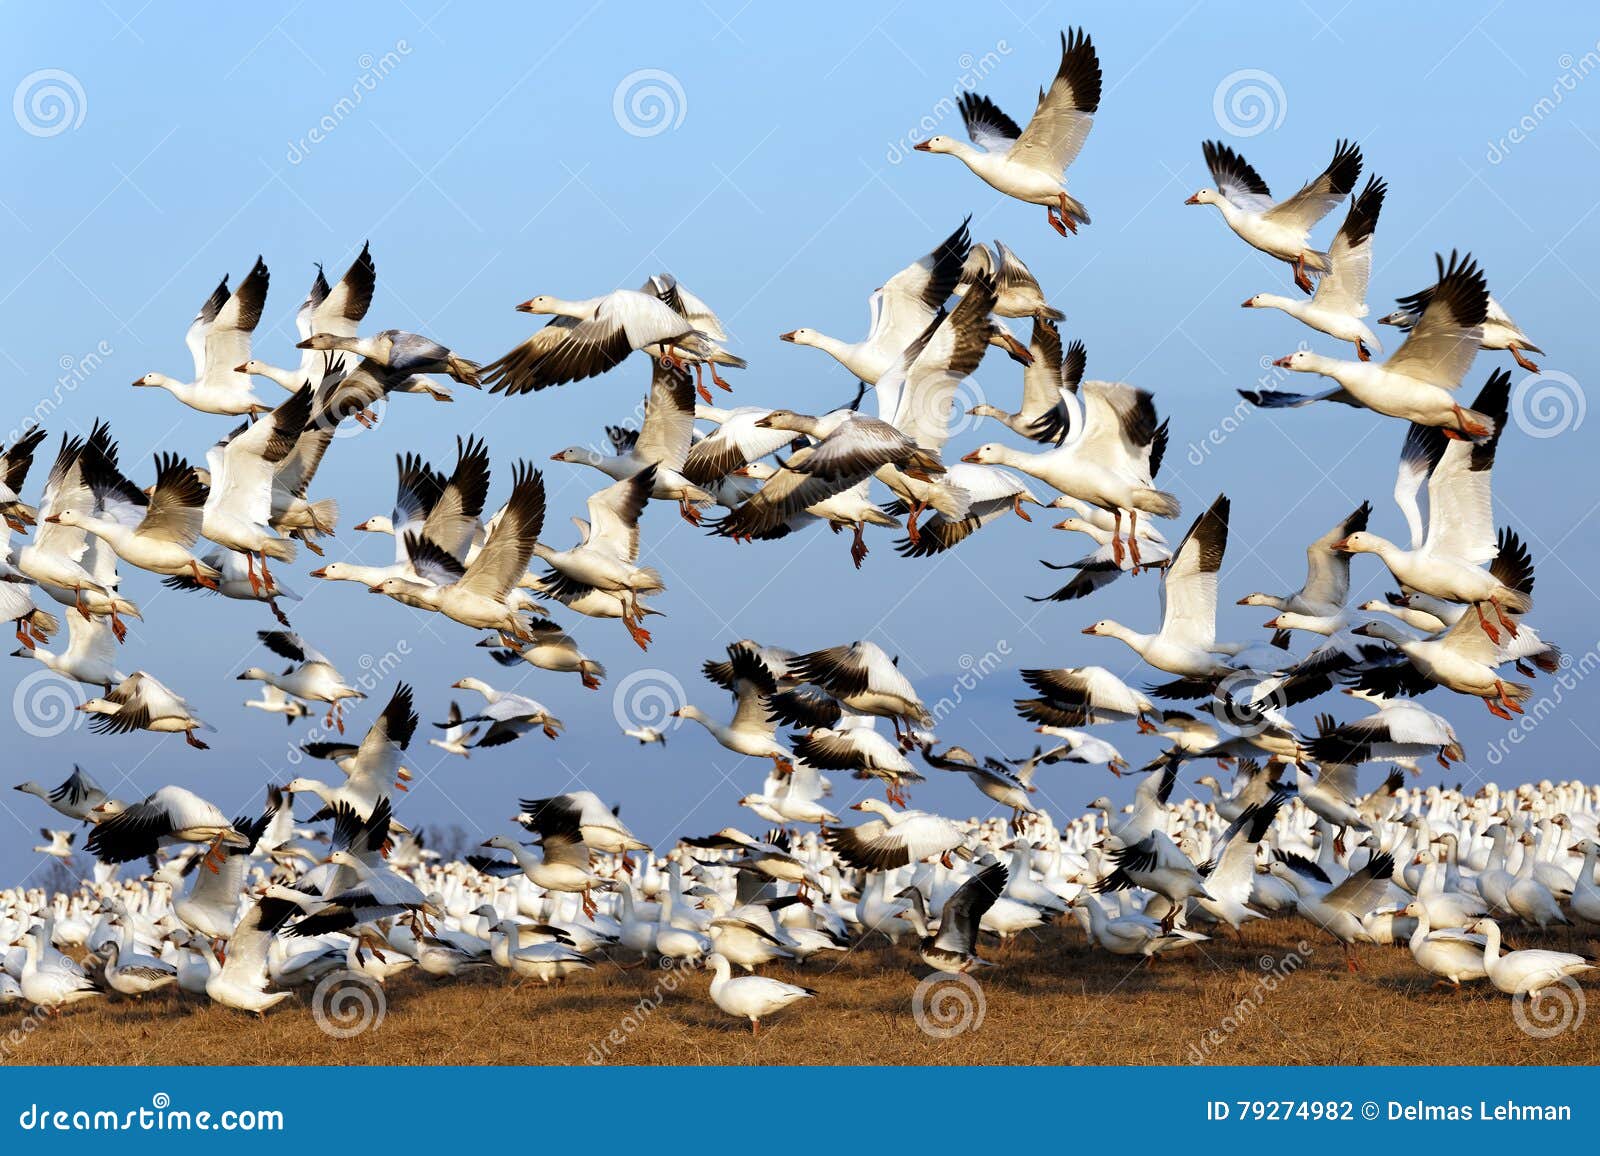 migrating snow geese fly up into blue sky